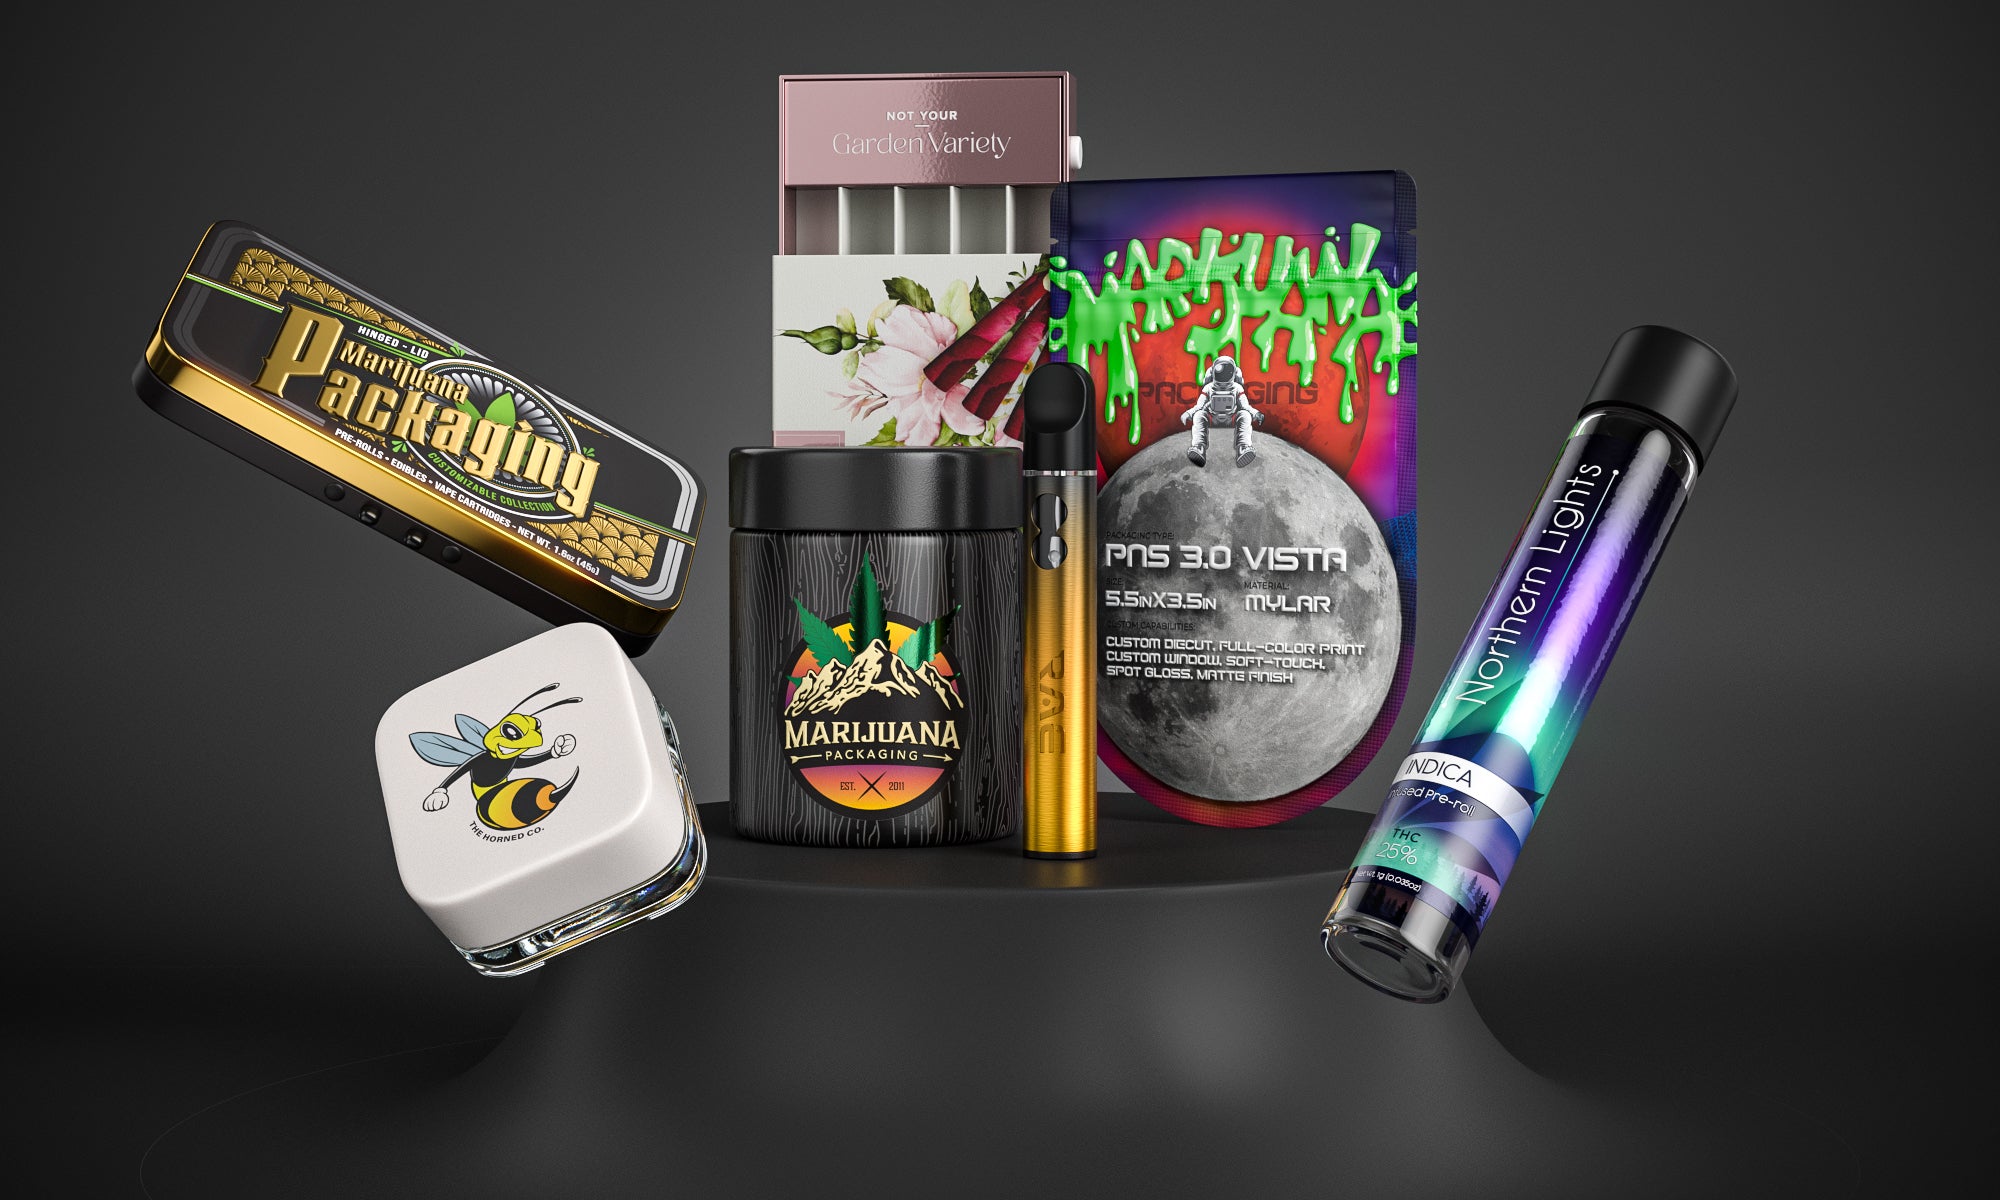 Variety of custom branded cannabis packaging products on pedestal on black background